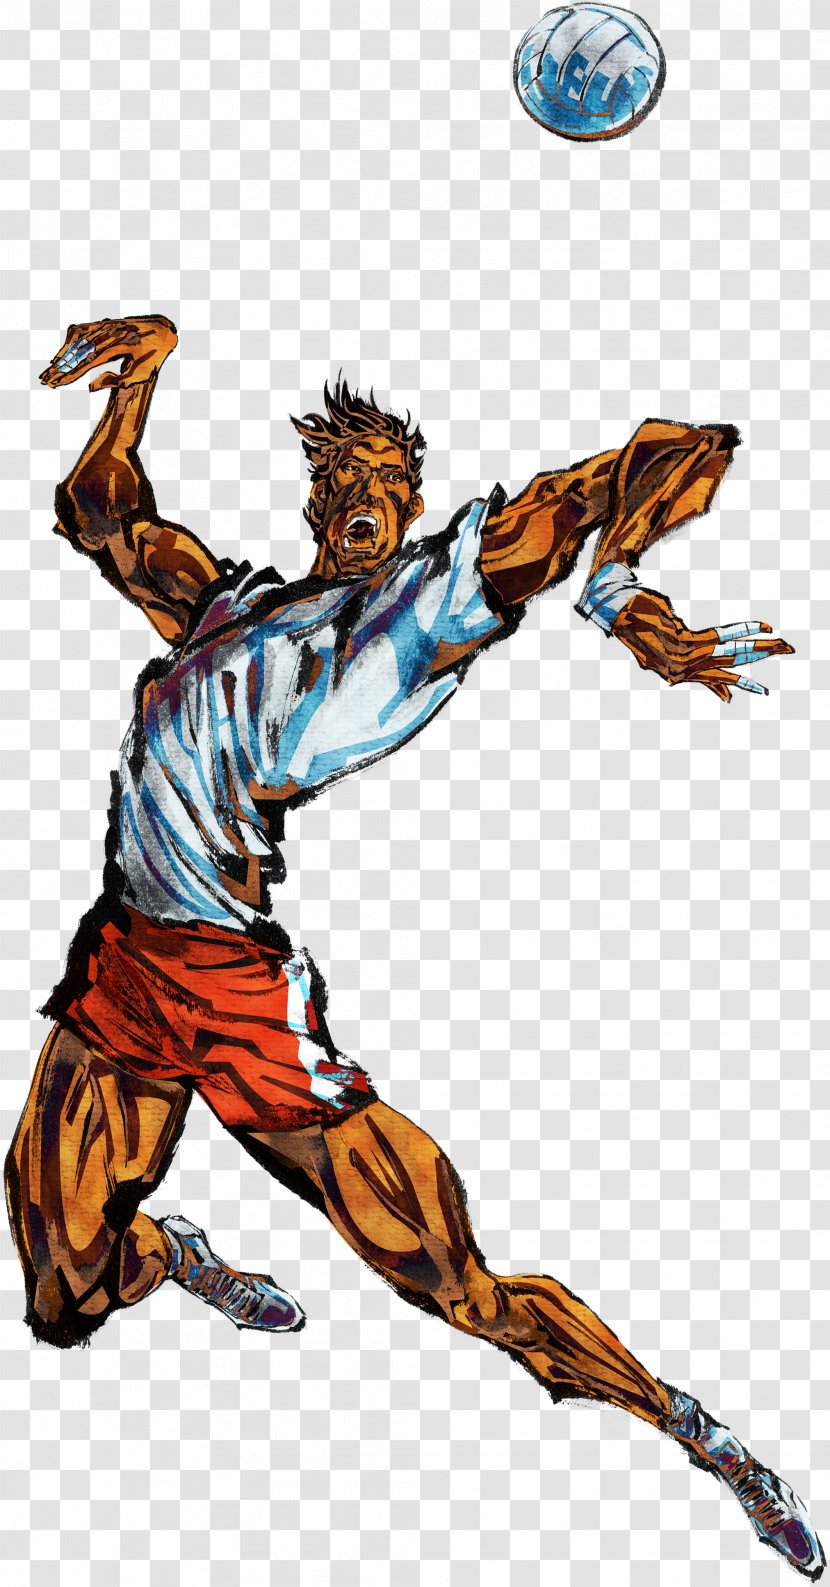 Beach Volleyball Player Football - Character Transparent PNG